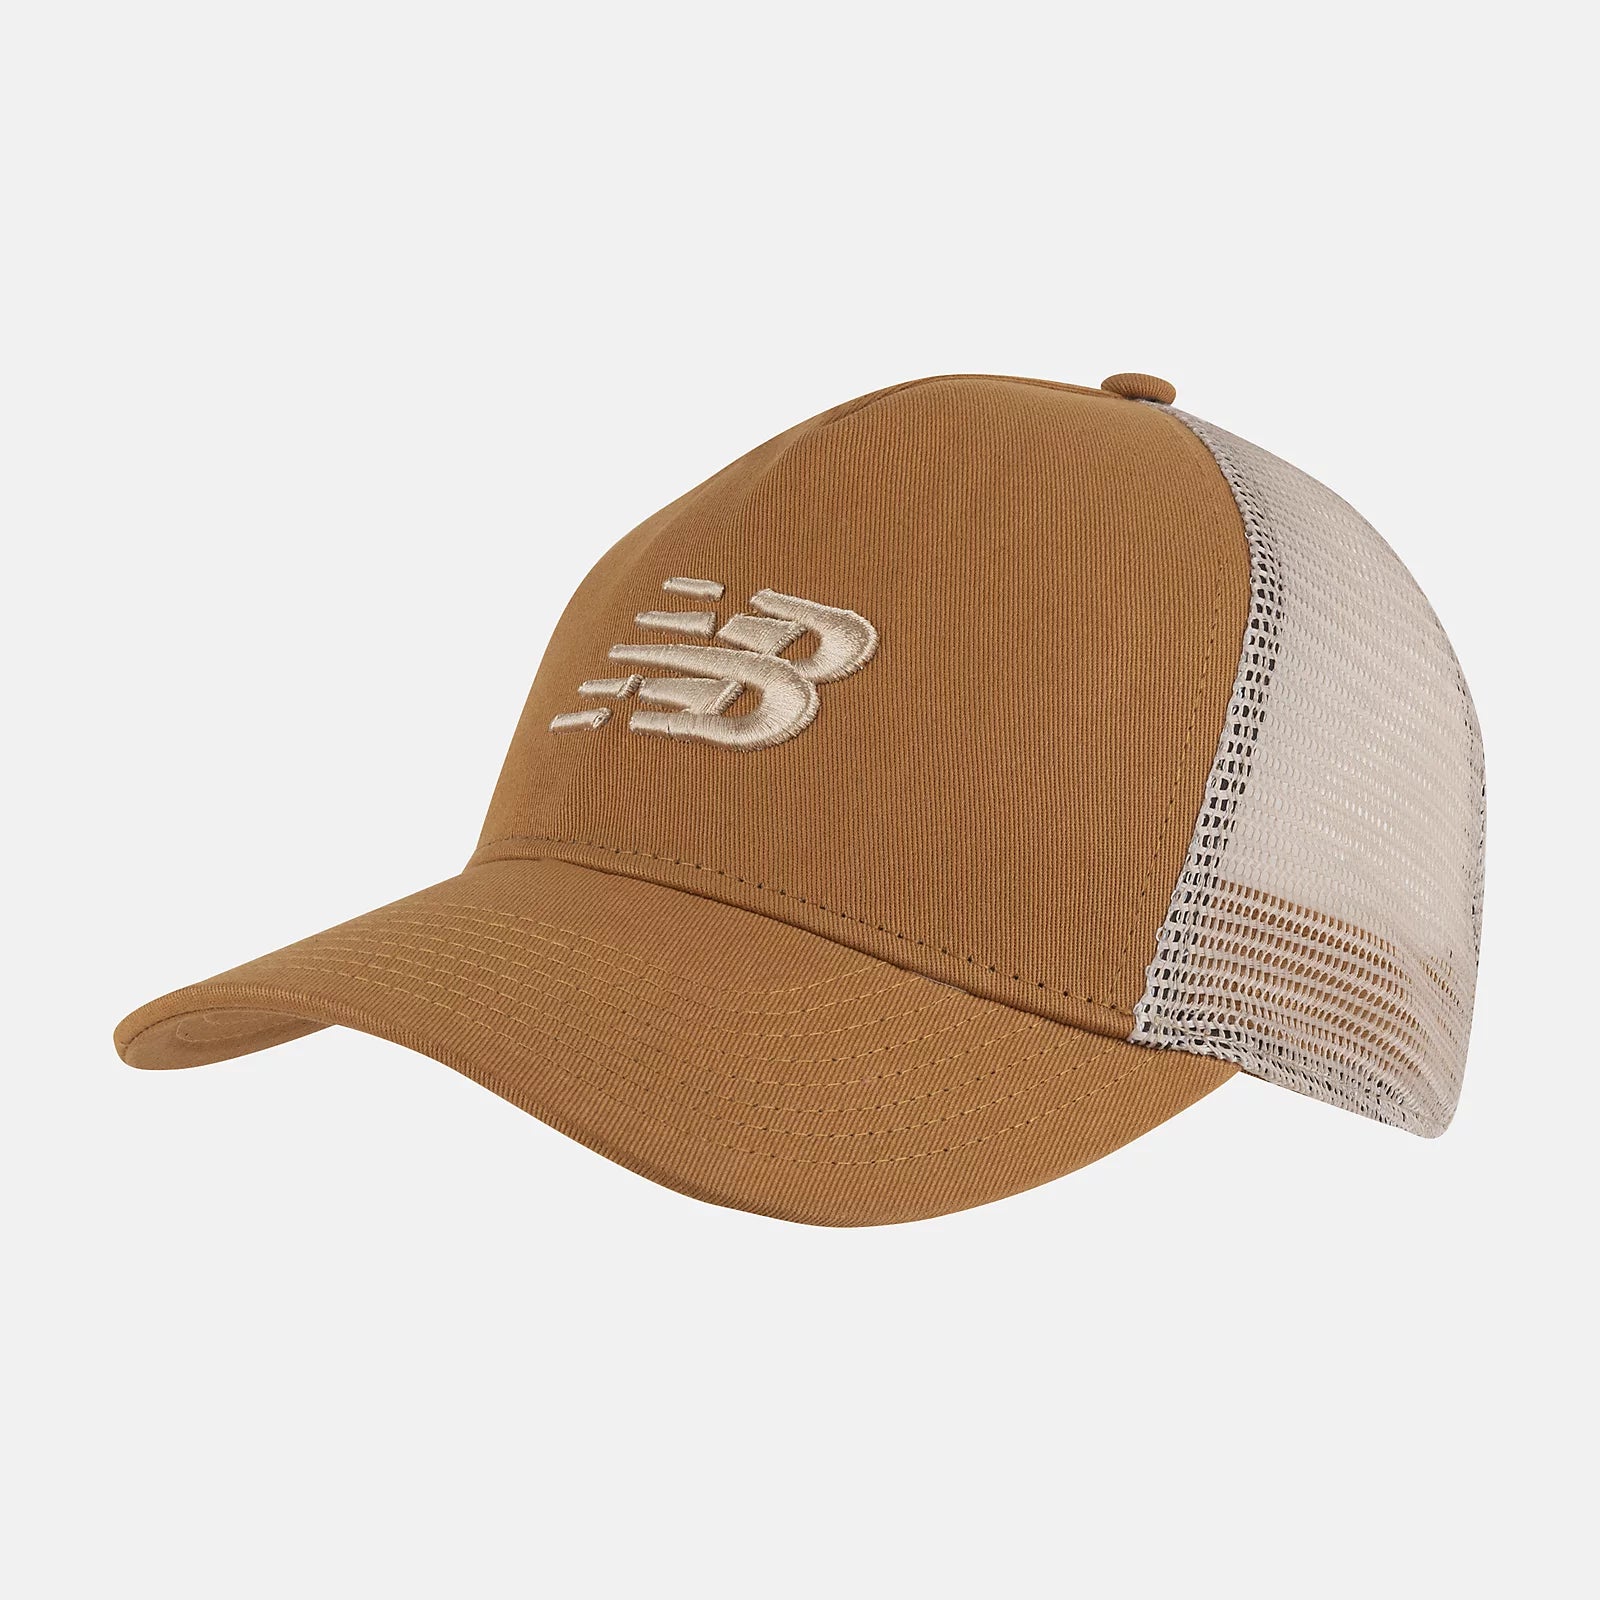 NEW BALANCE Lifestyle Athletics Trucker in Tobacco/Mindful Grey LAH01001 O/S TOBACCO/MINDFUL GREY FROM EIGHTYWINGOLD - OFFICIAL BRAND PARTNER